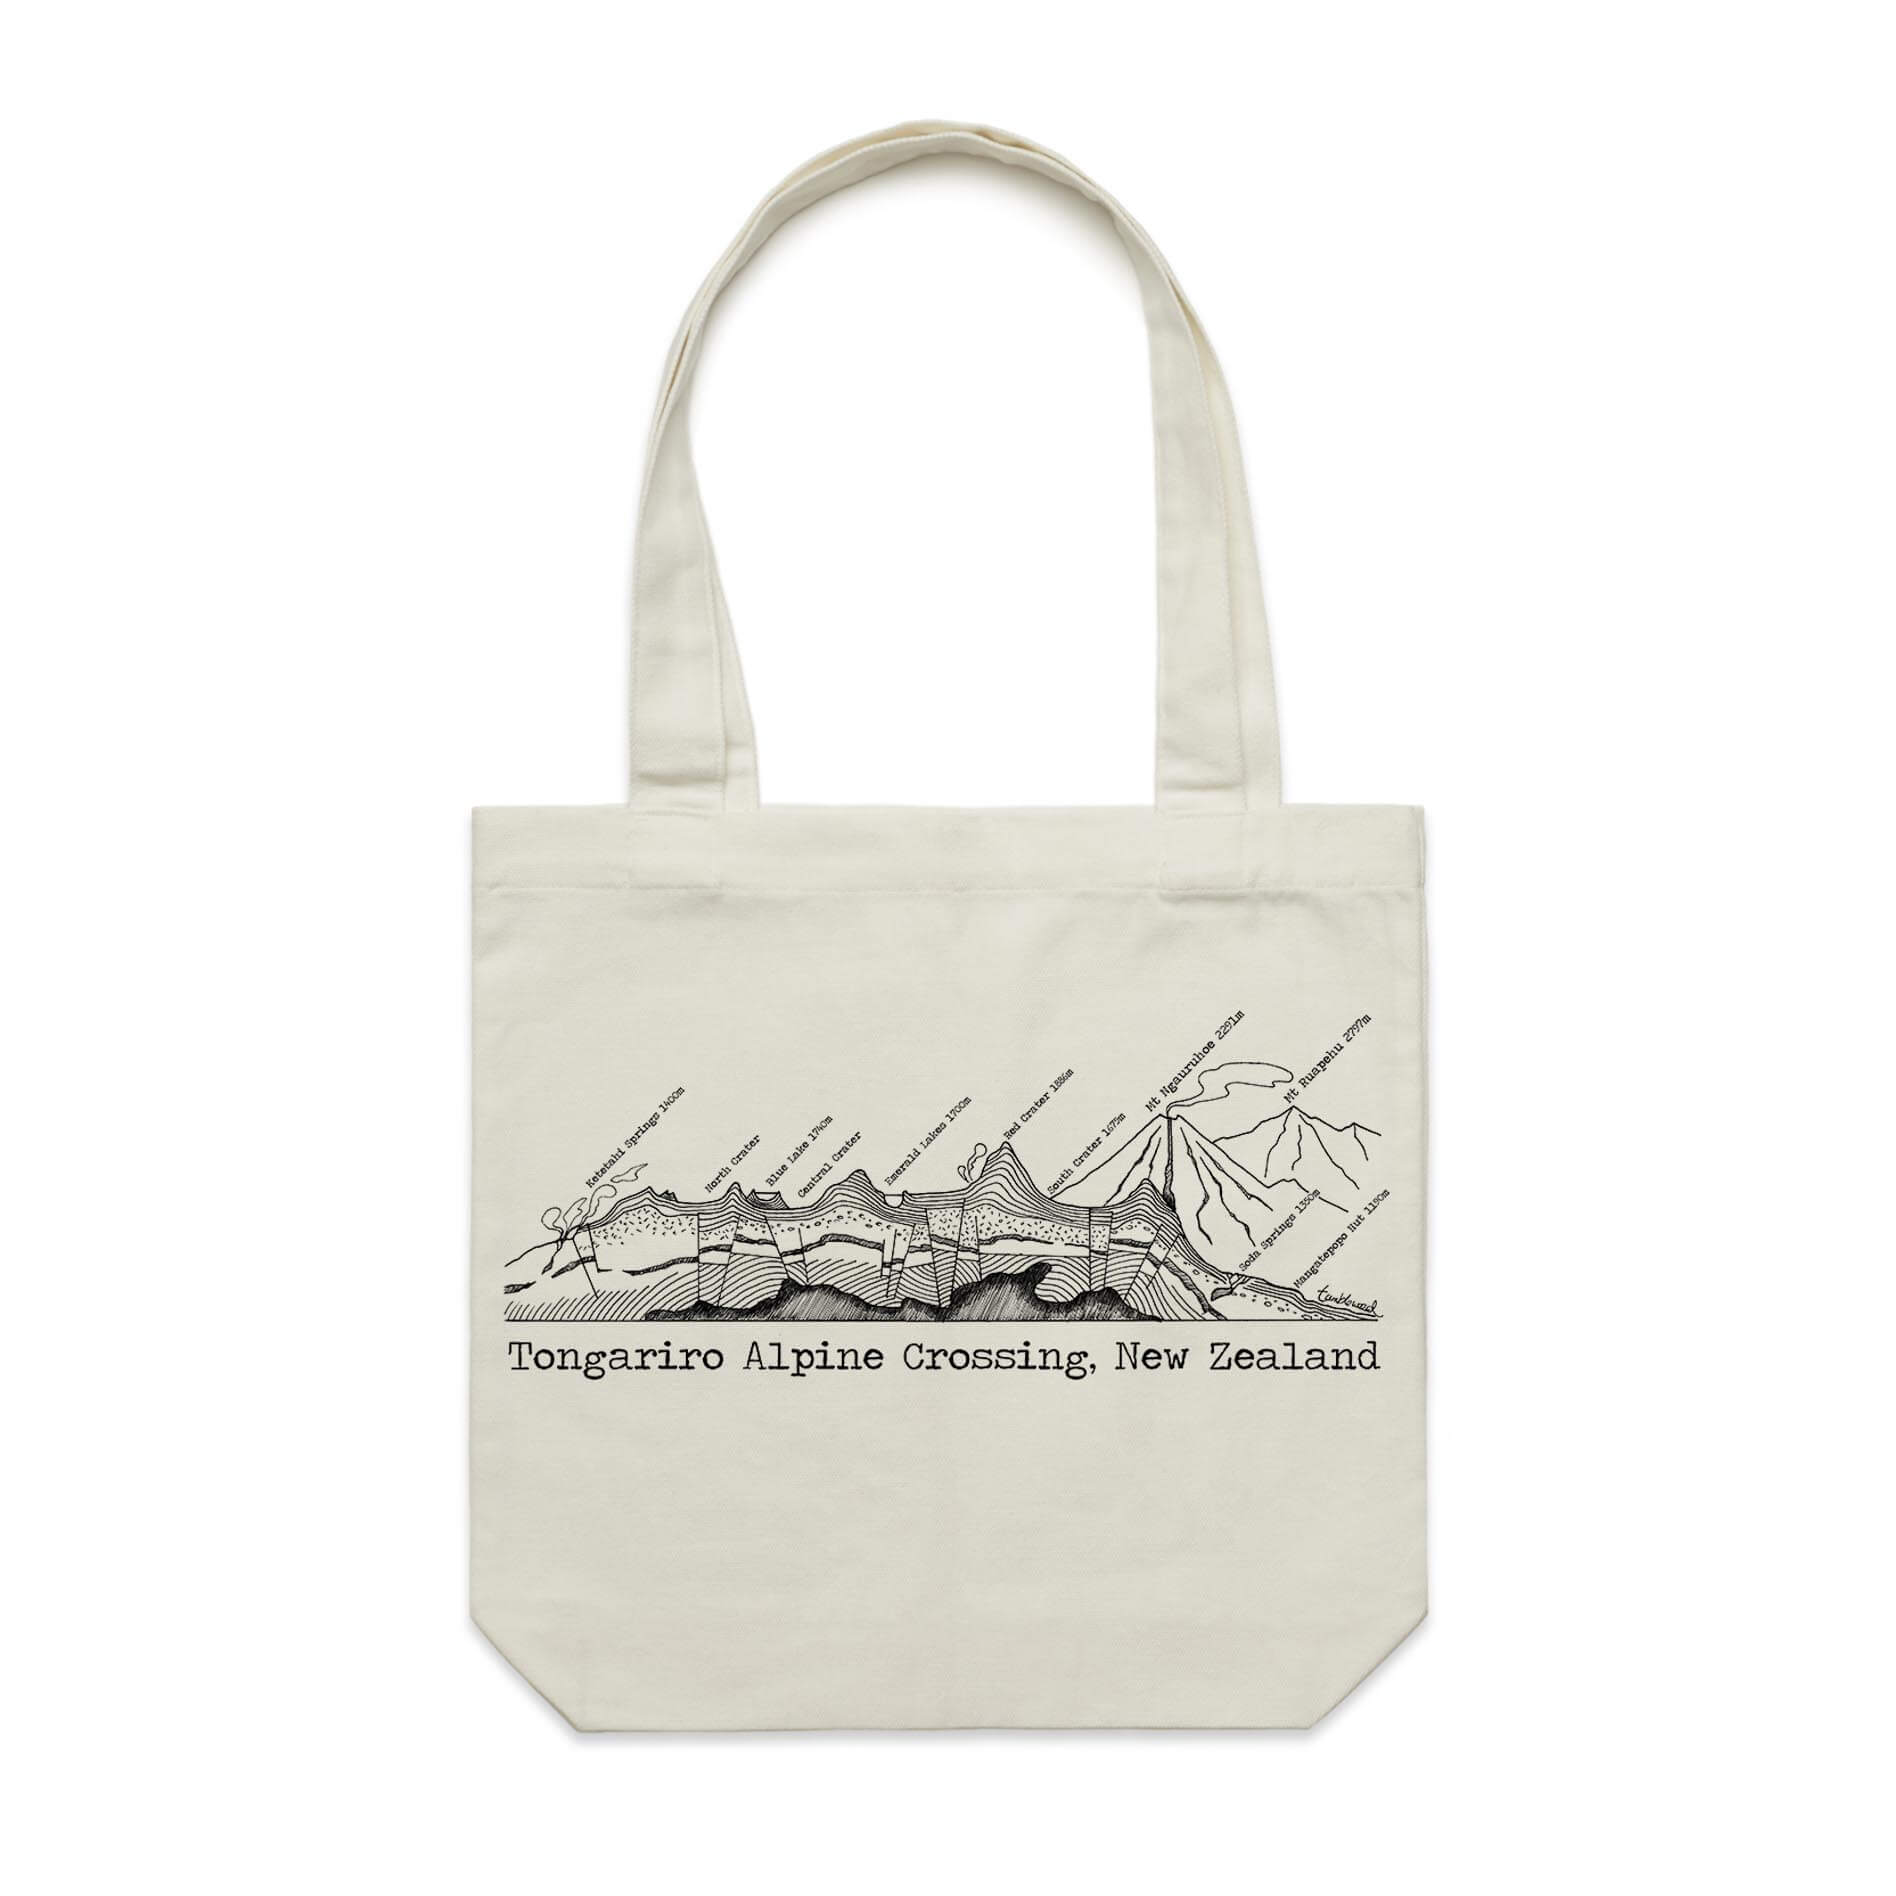 Cotton canvas tote bag with a screen printed Tongariro Crossing design.